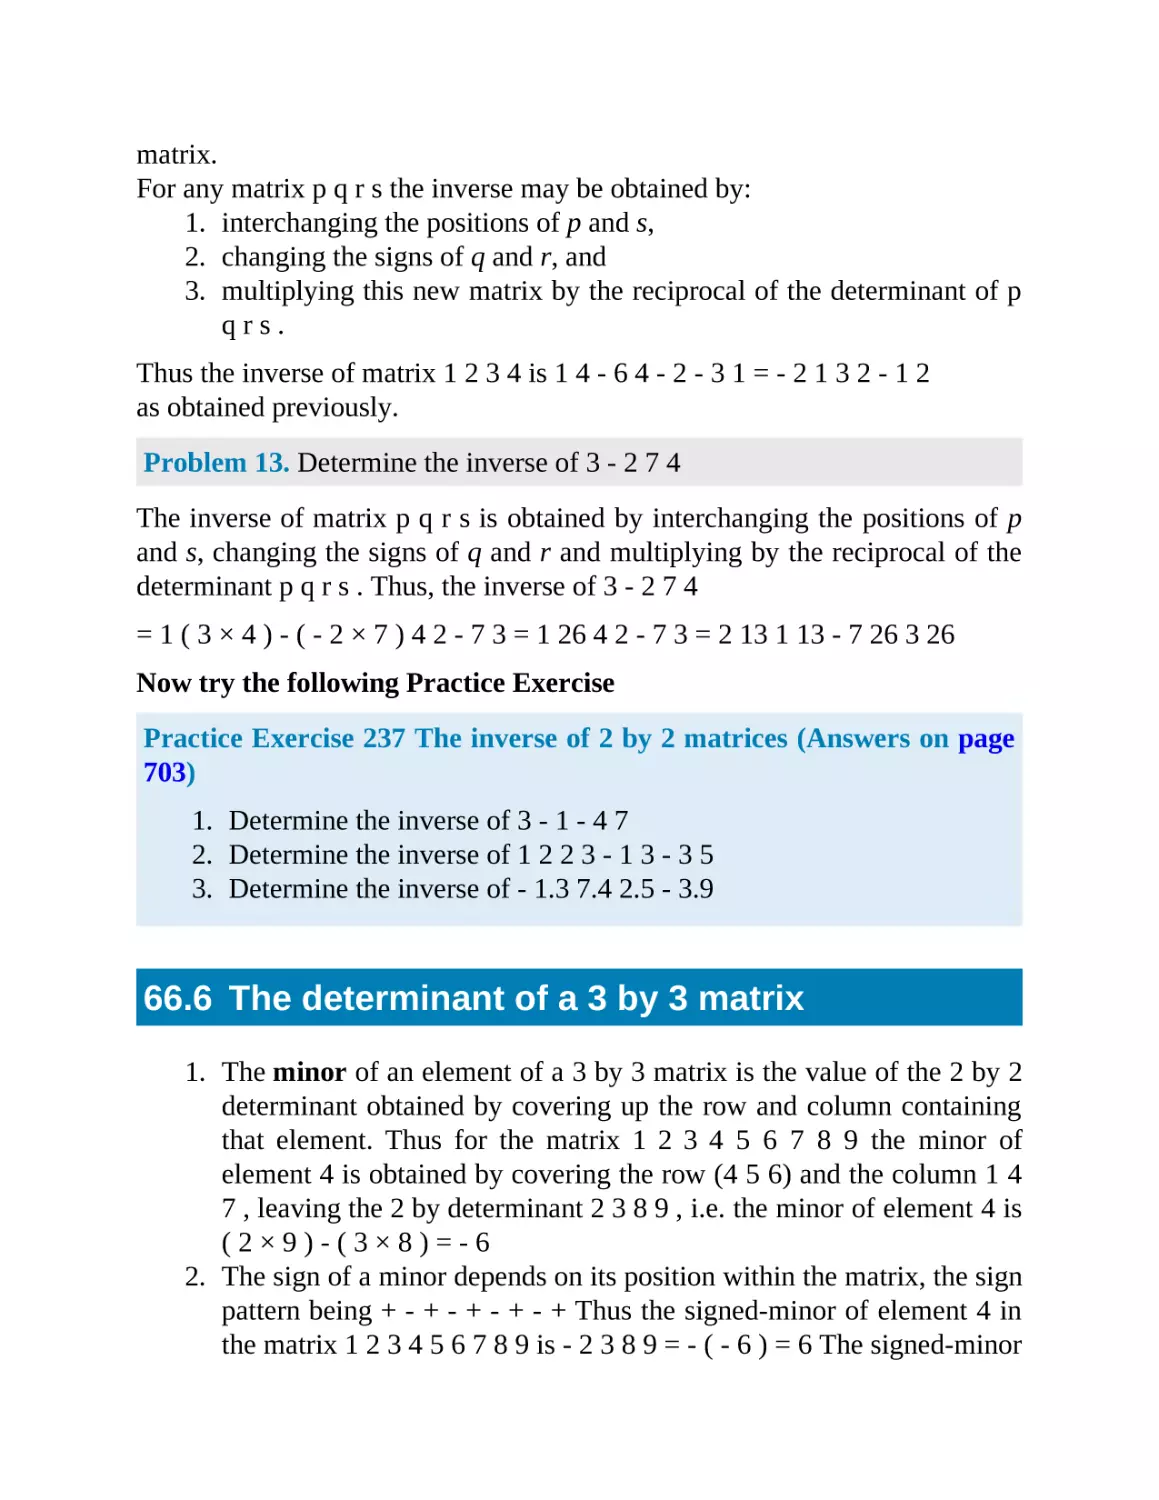 66.6 The determinant of a 3 by 3 matrix